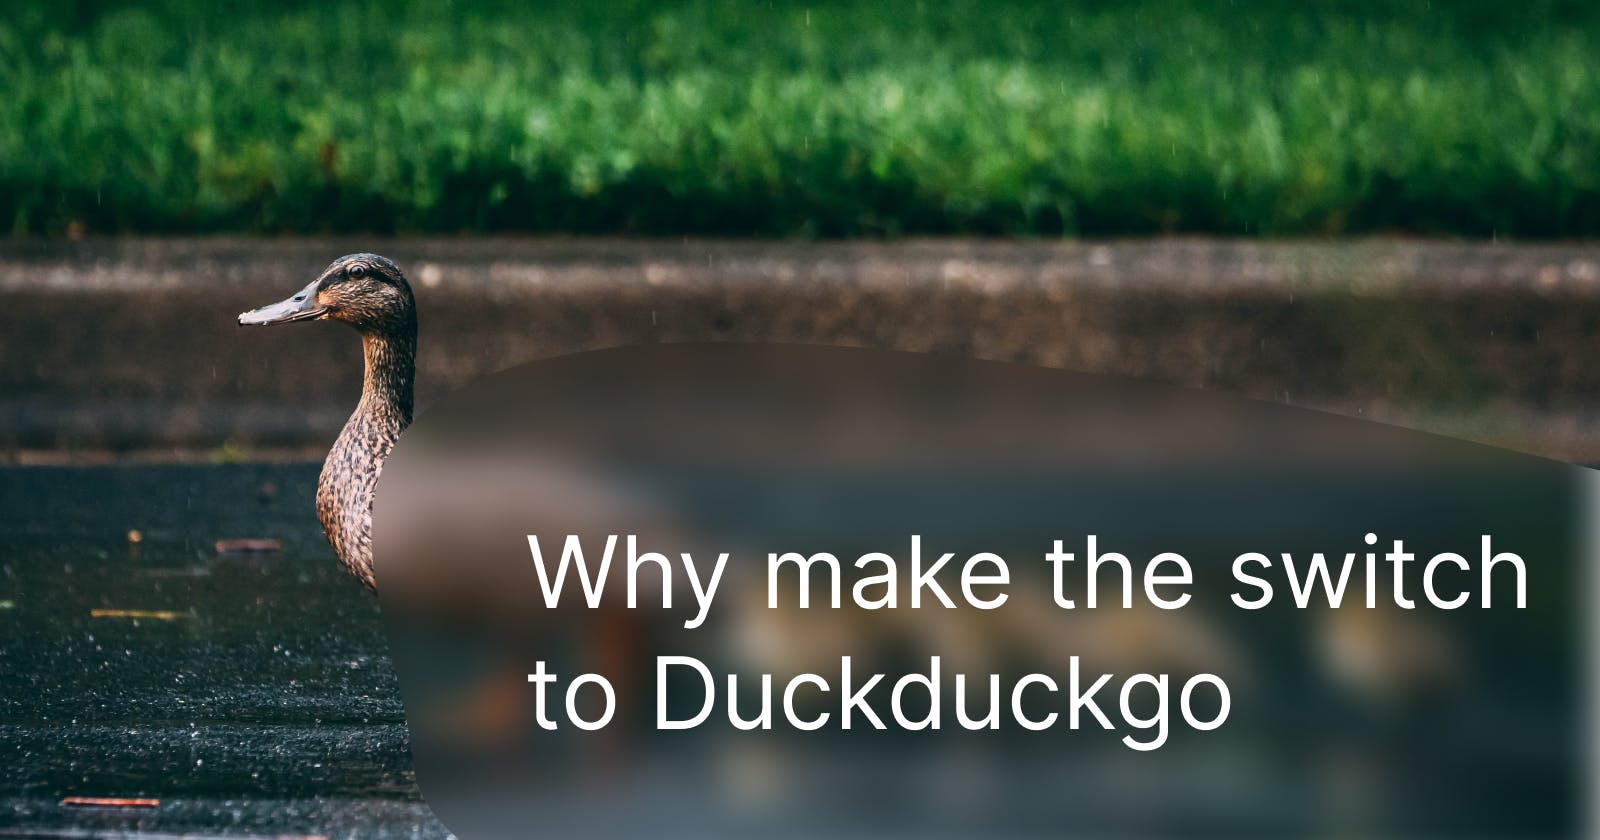 Why switch to duckduckgo